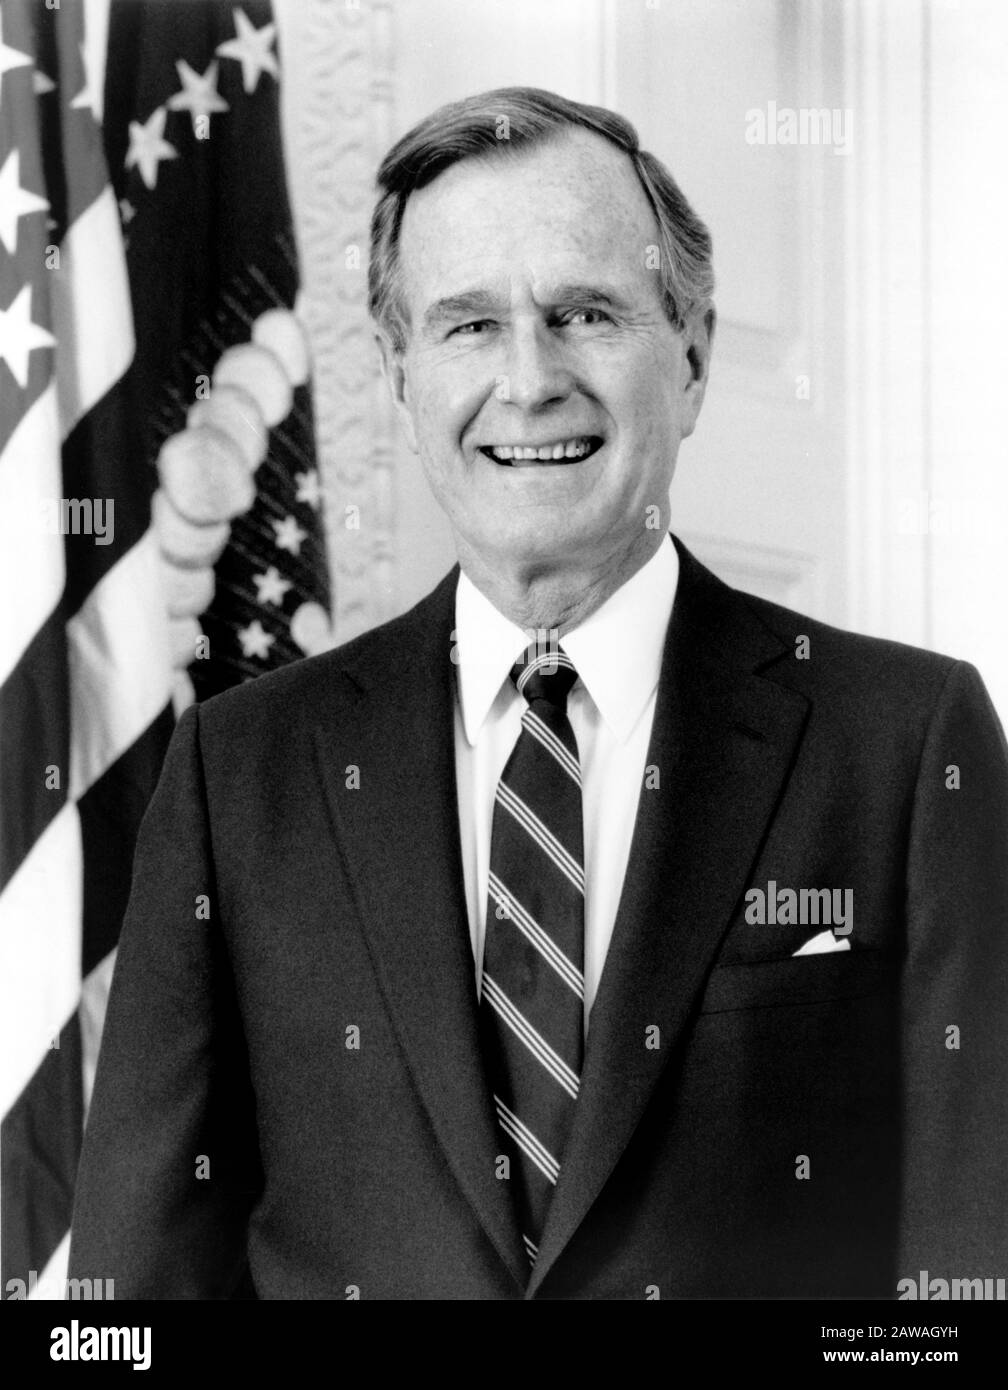 1989 , WASHINGTON , USA : George Herbert Walker Bush (born June 12, 1924) was the 41st President of the United States, serving from 1989 to 1993 . Off Stock Photo